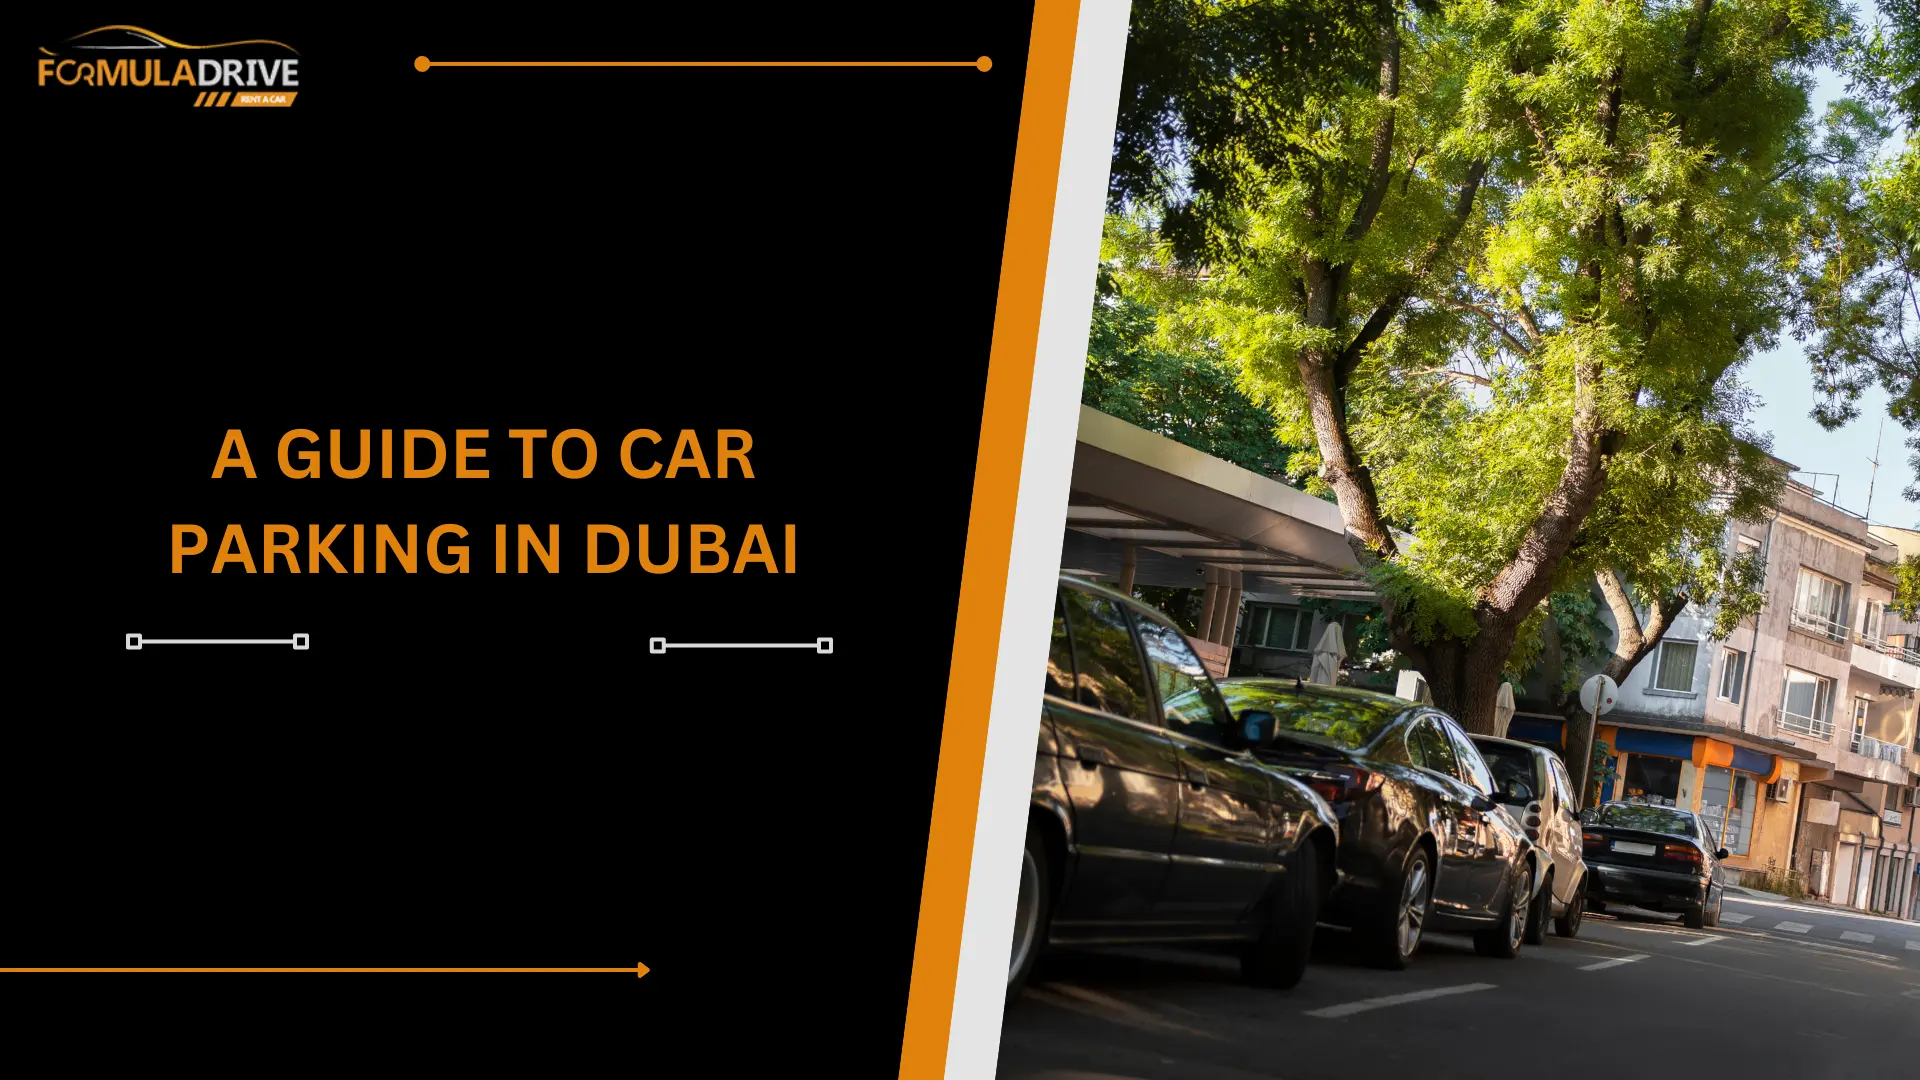 A GUIDE TO CAR PARKING IN DUBAI